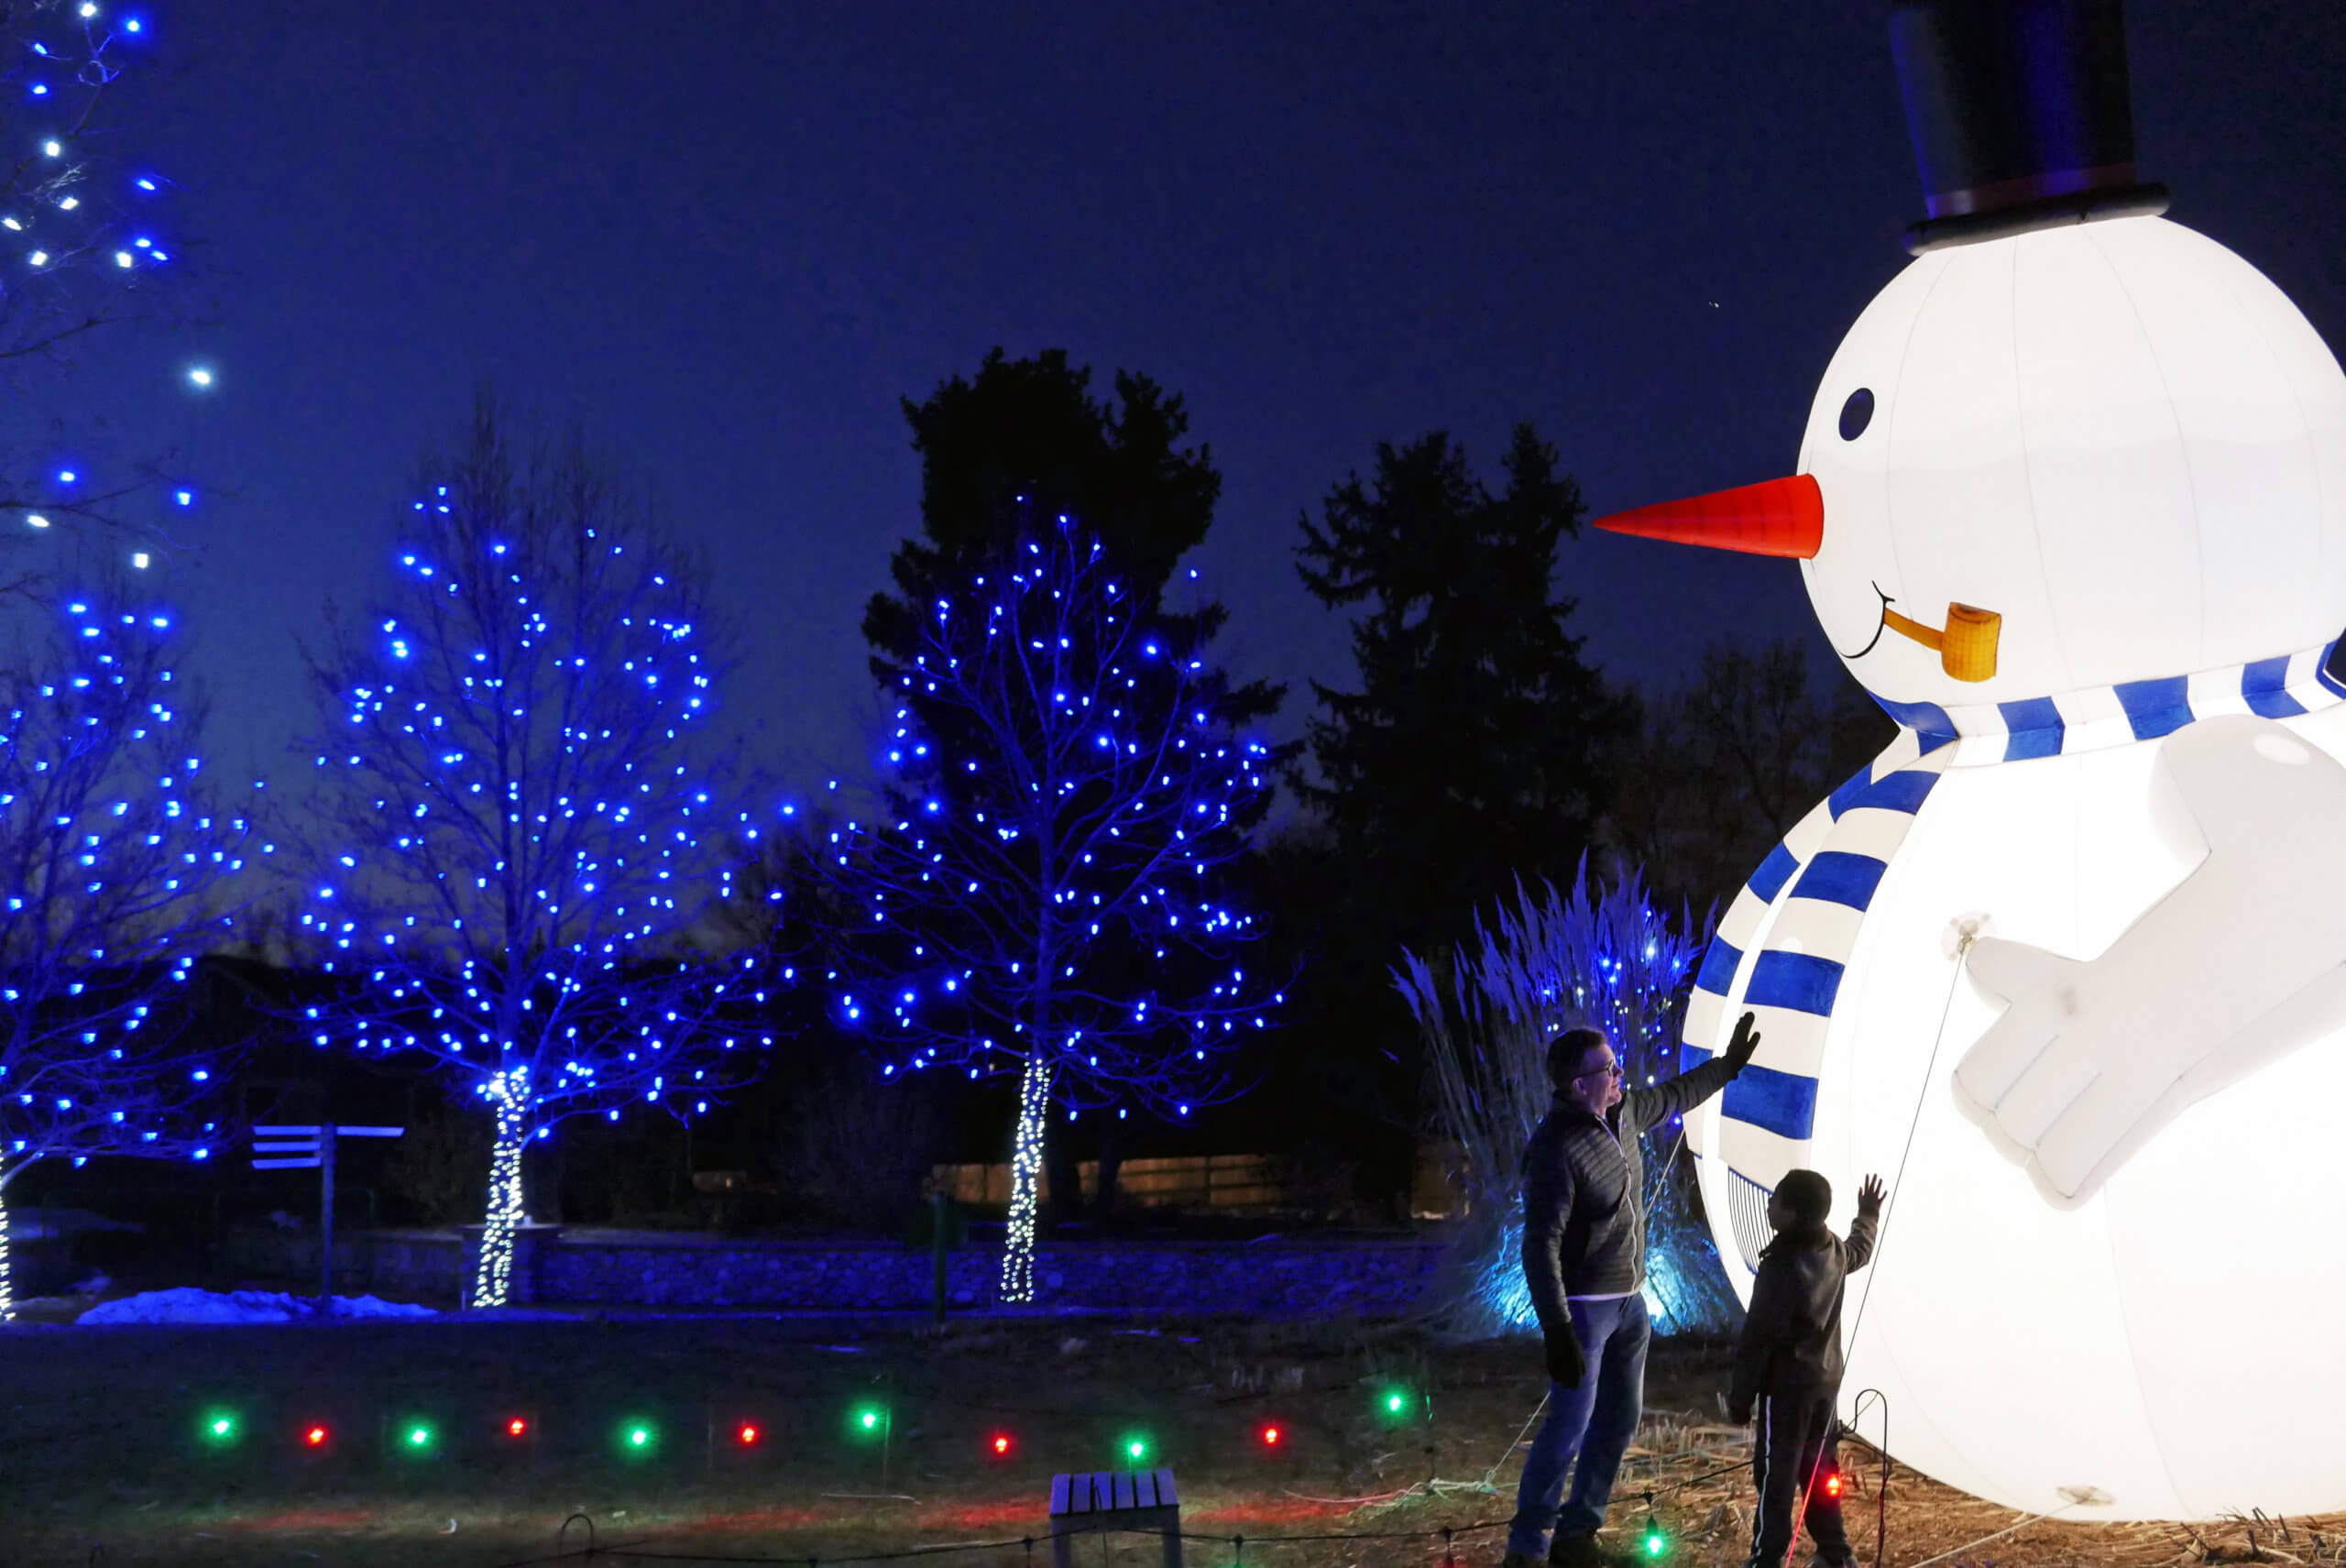 A Father and son rub the belly of a giant, glowing snowman